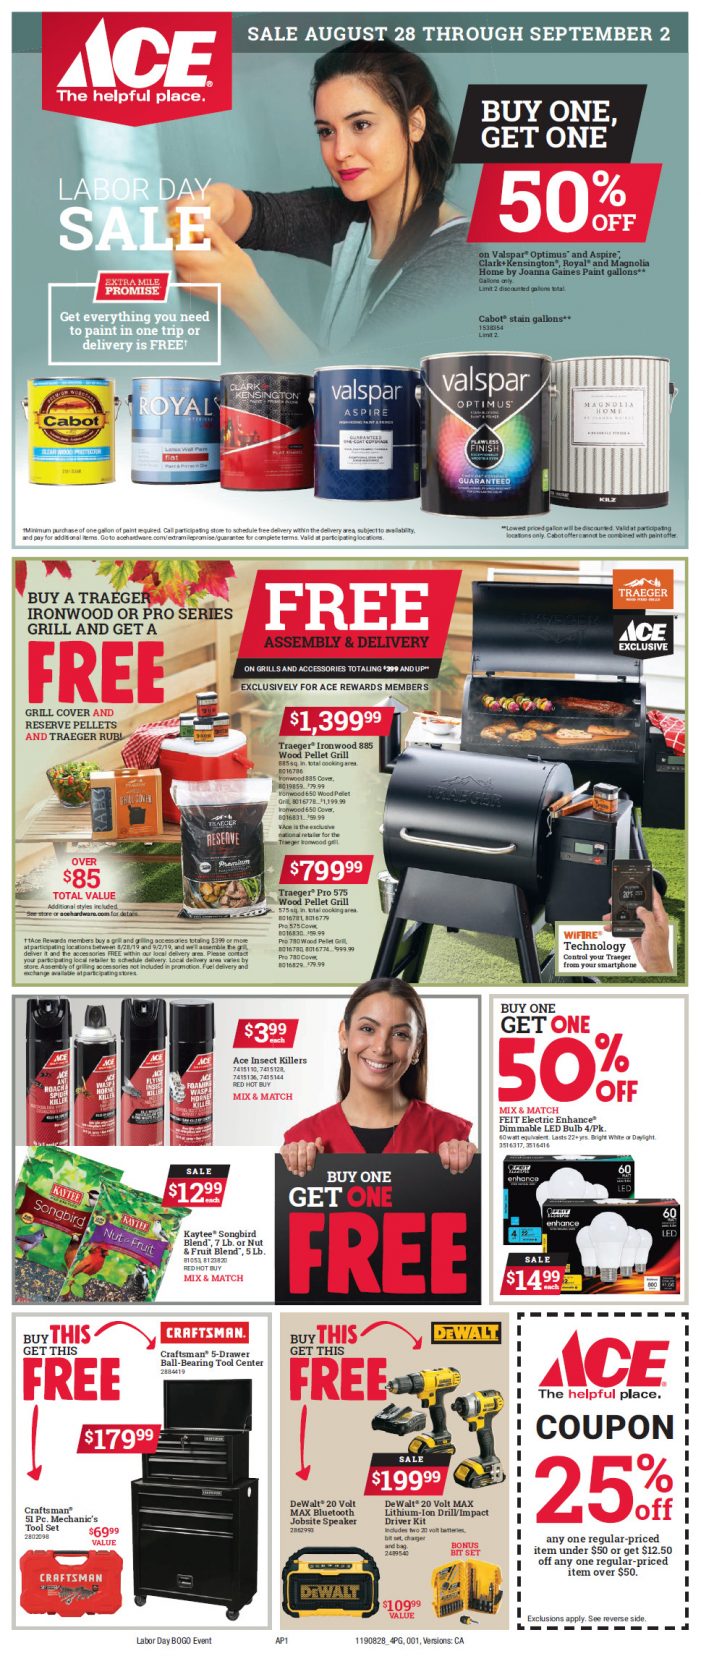 Make Sender’s Market Ace Hardware Your Labor Day Weekend Headquarters